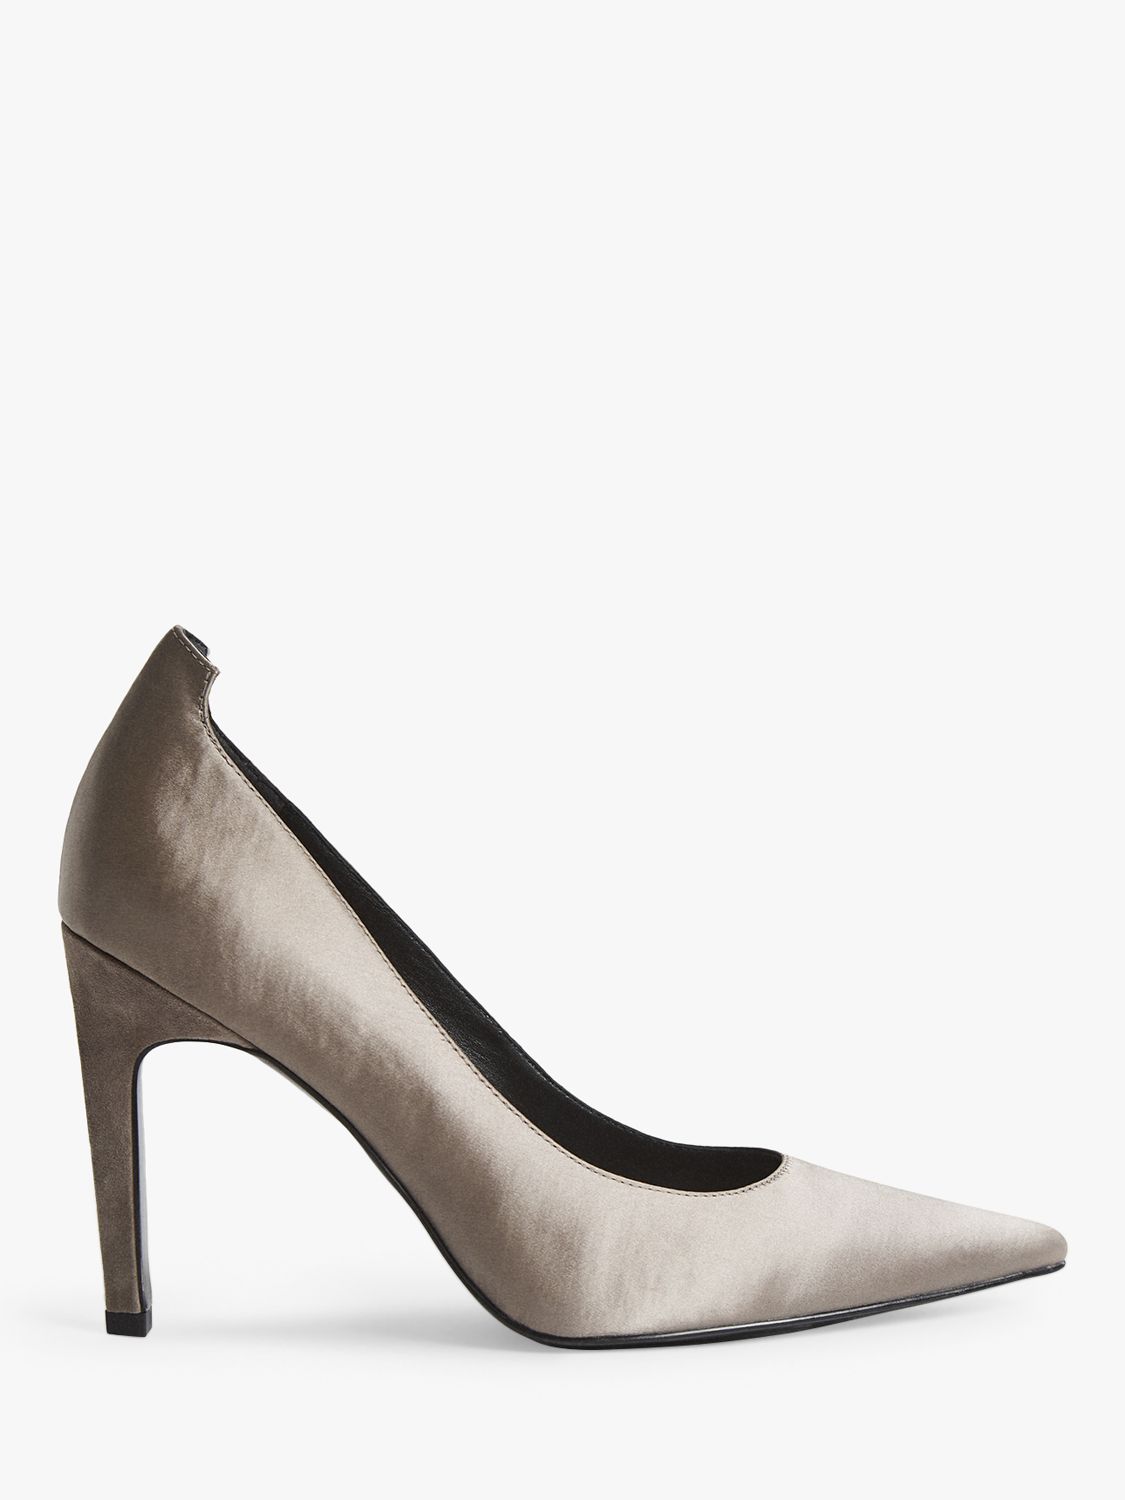 grey leather court shoes